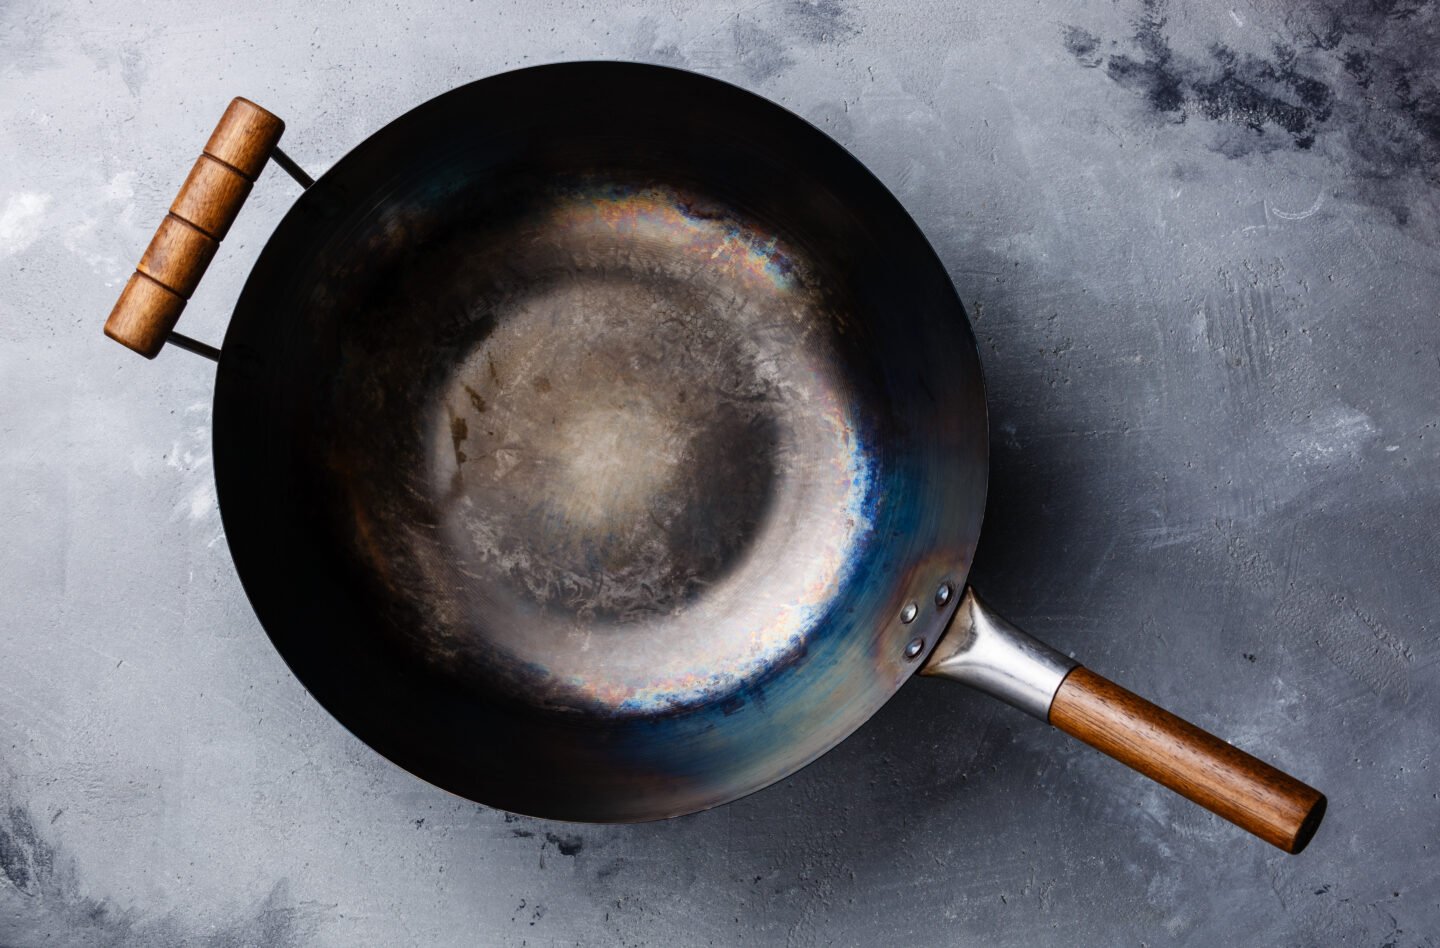 Wok,Pan,With,Wooden,Handle,Empty,On,Gray,Concrete,Background